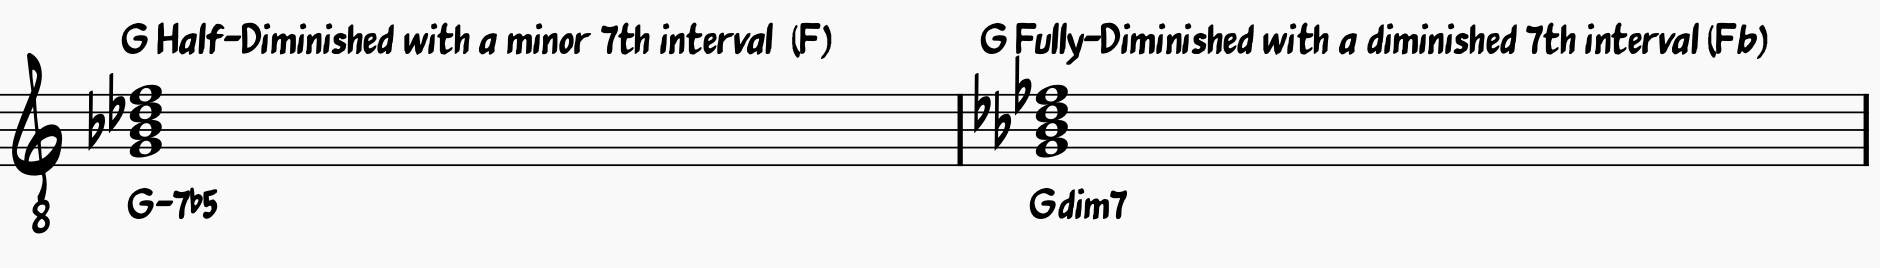 G half-diminished vs. G fully-diminished seventh chords